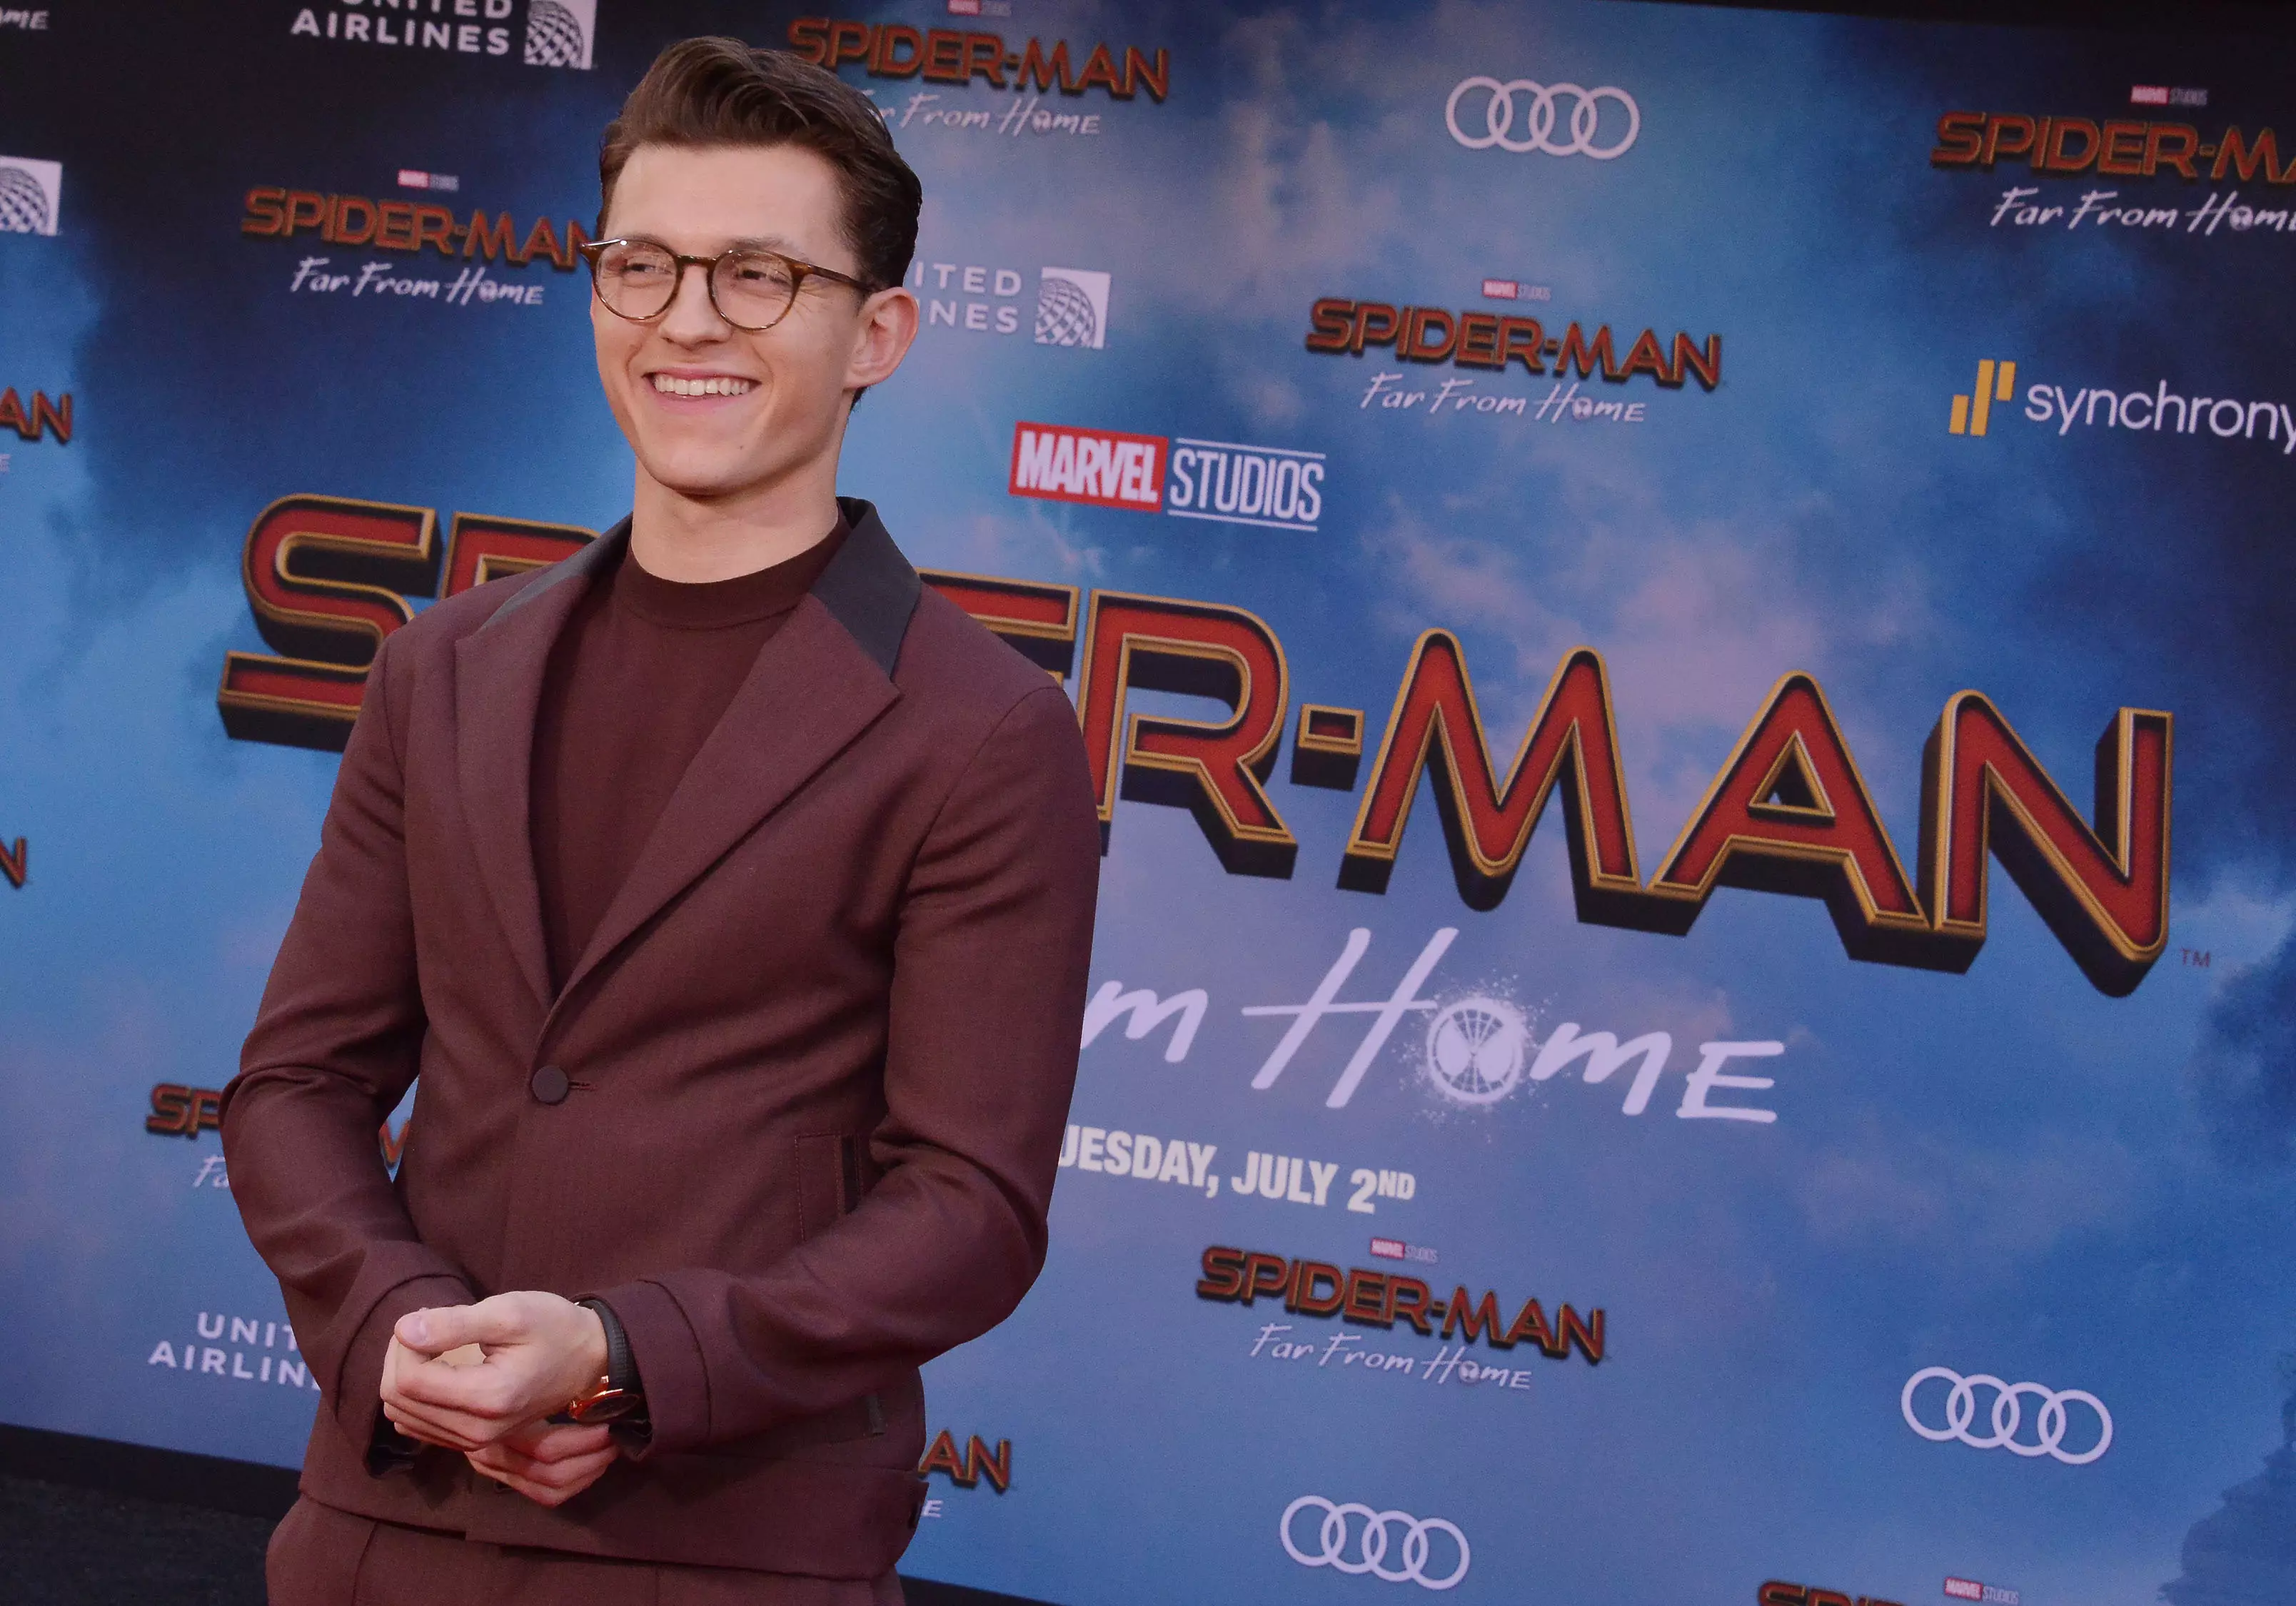 Tom Holland says he doesn't have a clue what's going on in the new Spider-Man movie.